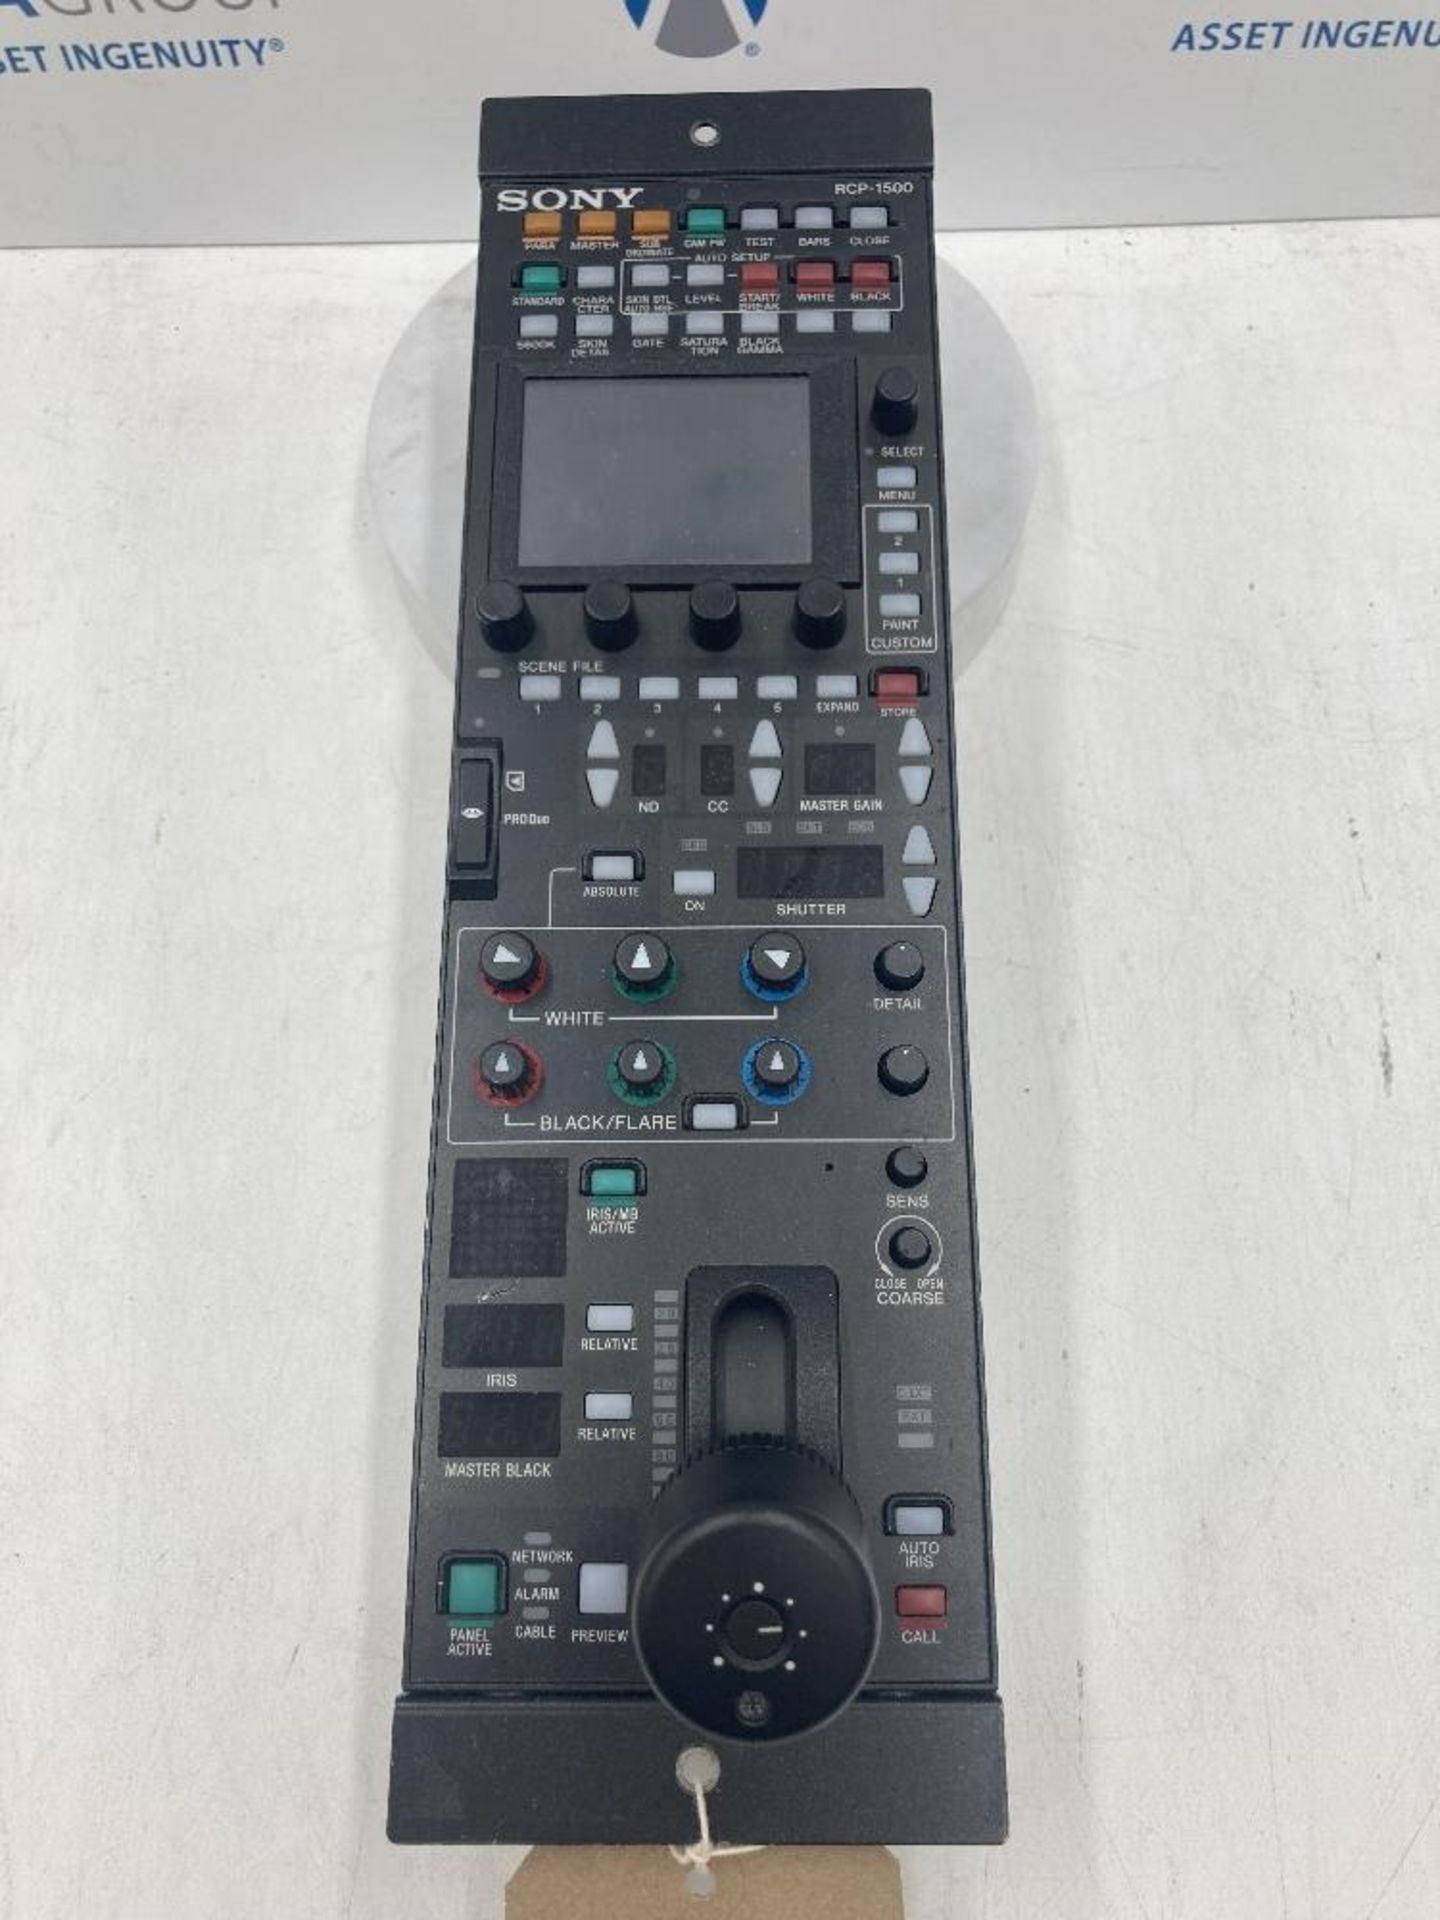 Sony RCP-1500 Remote Control Panel - Image 2 of 4